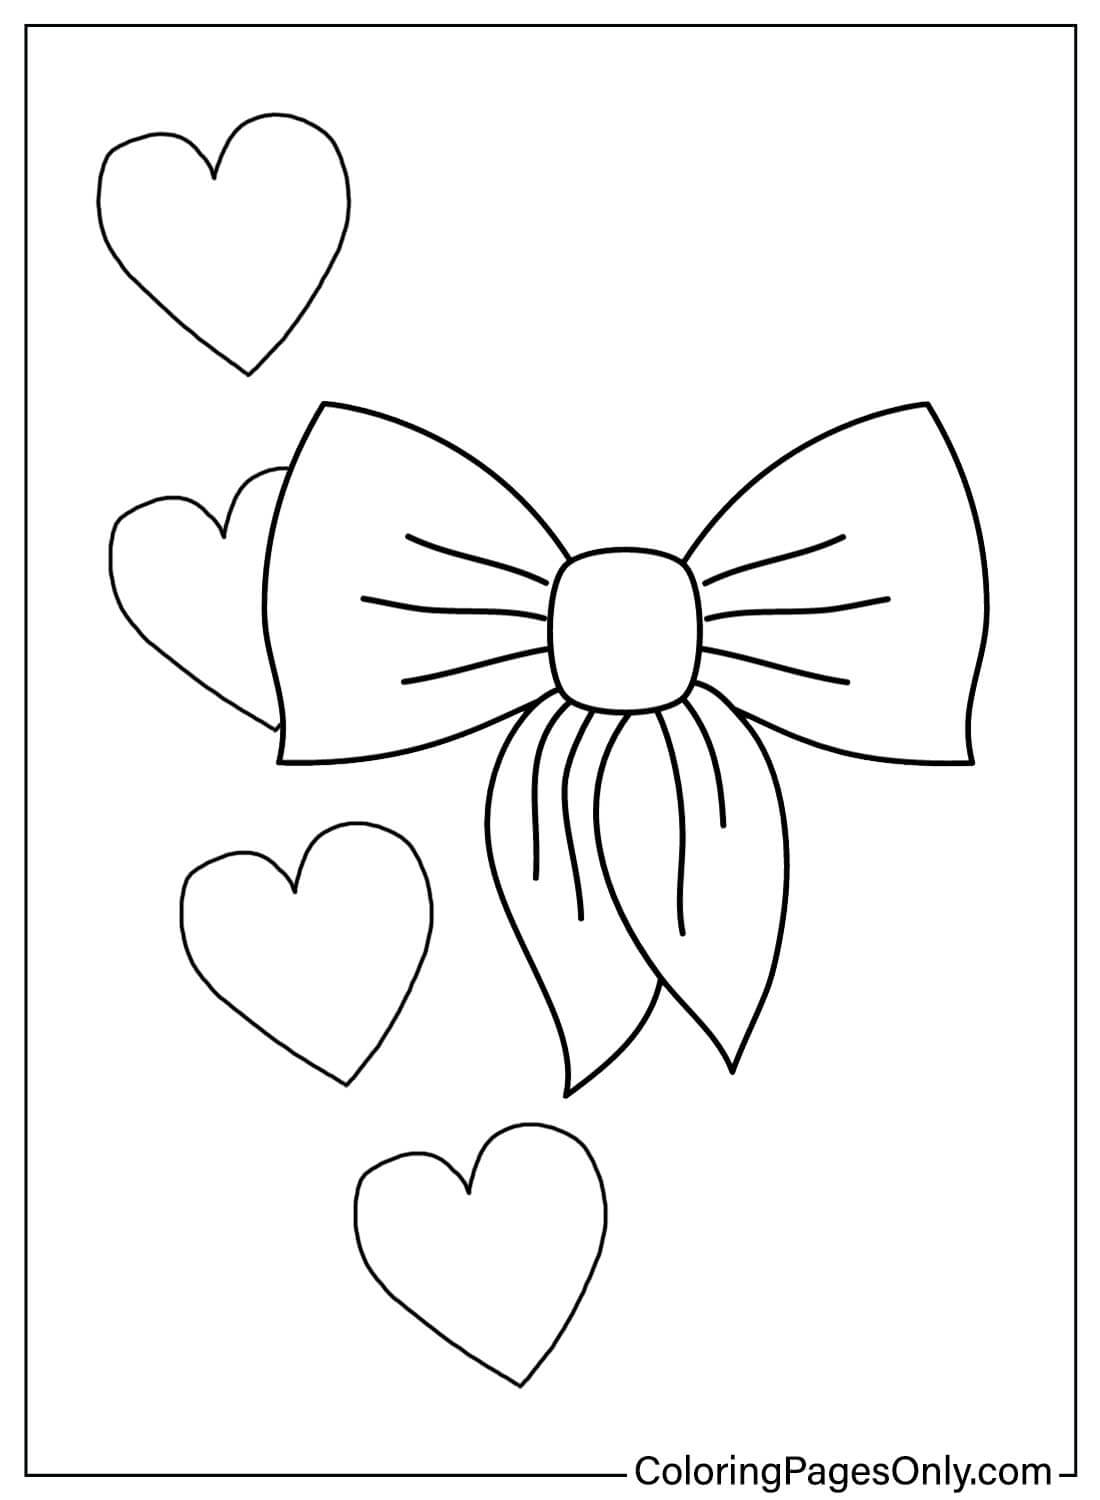 Bow Coloring Page Printable from Bow